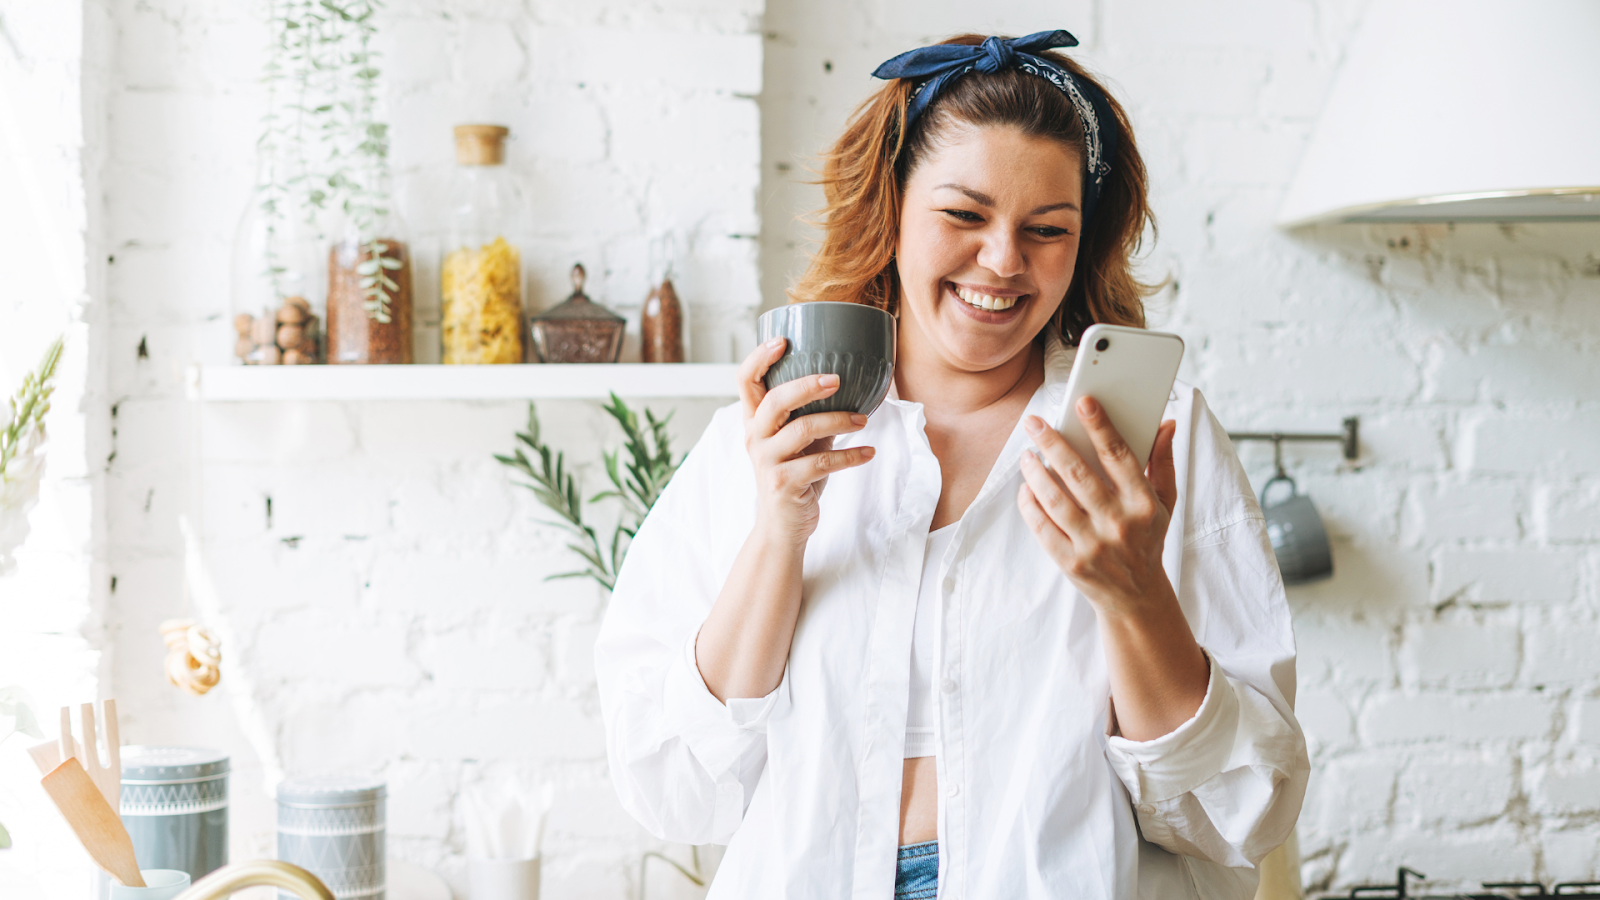 A Woman looking at her phone smiling with a cup of coffee.